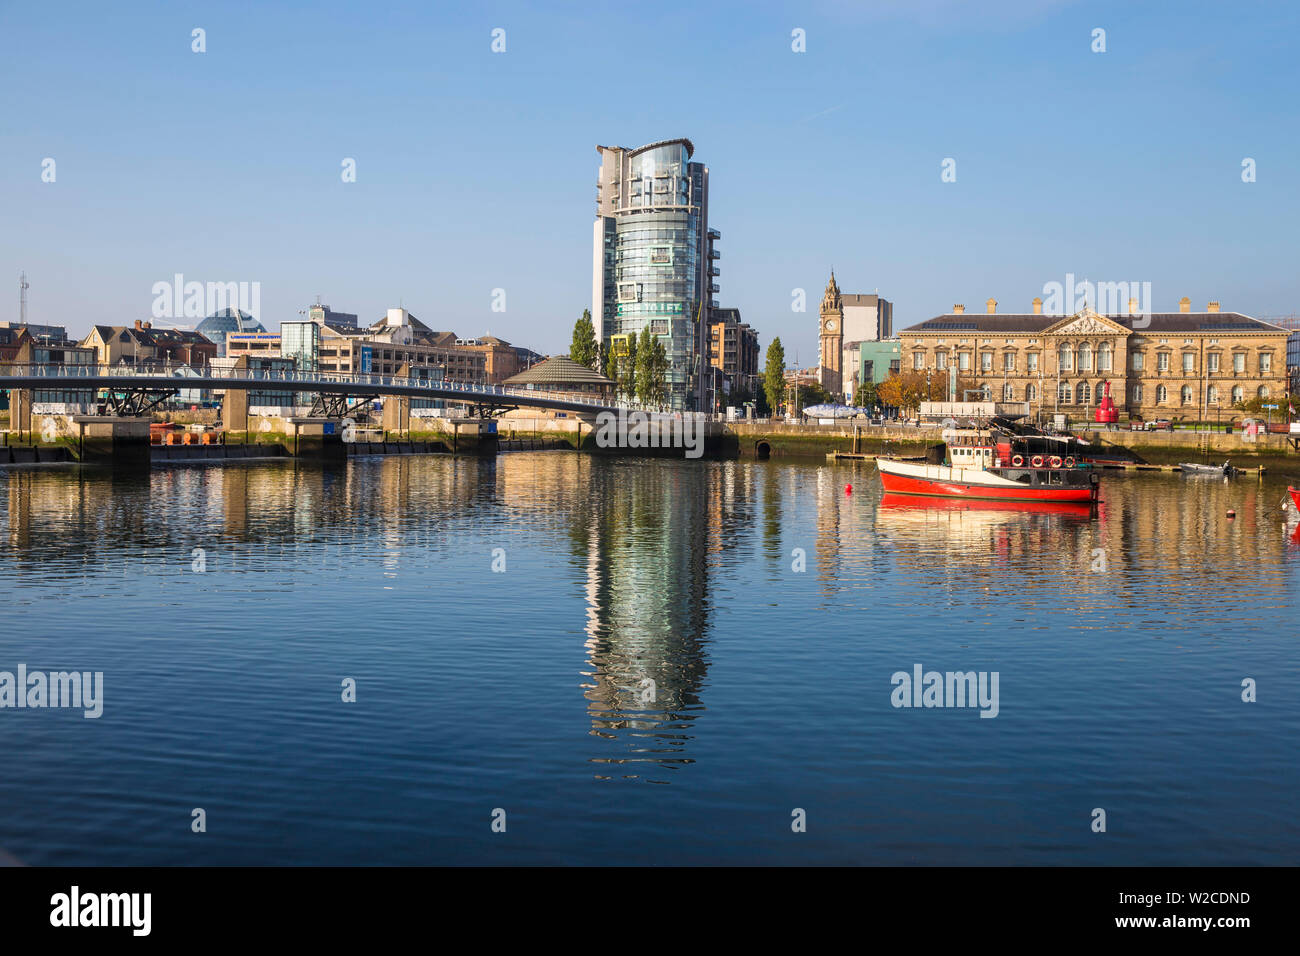 United Kingdom, Northern Ireland, Belfast, The Boat building on the Lagan riverfront Stock Photo